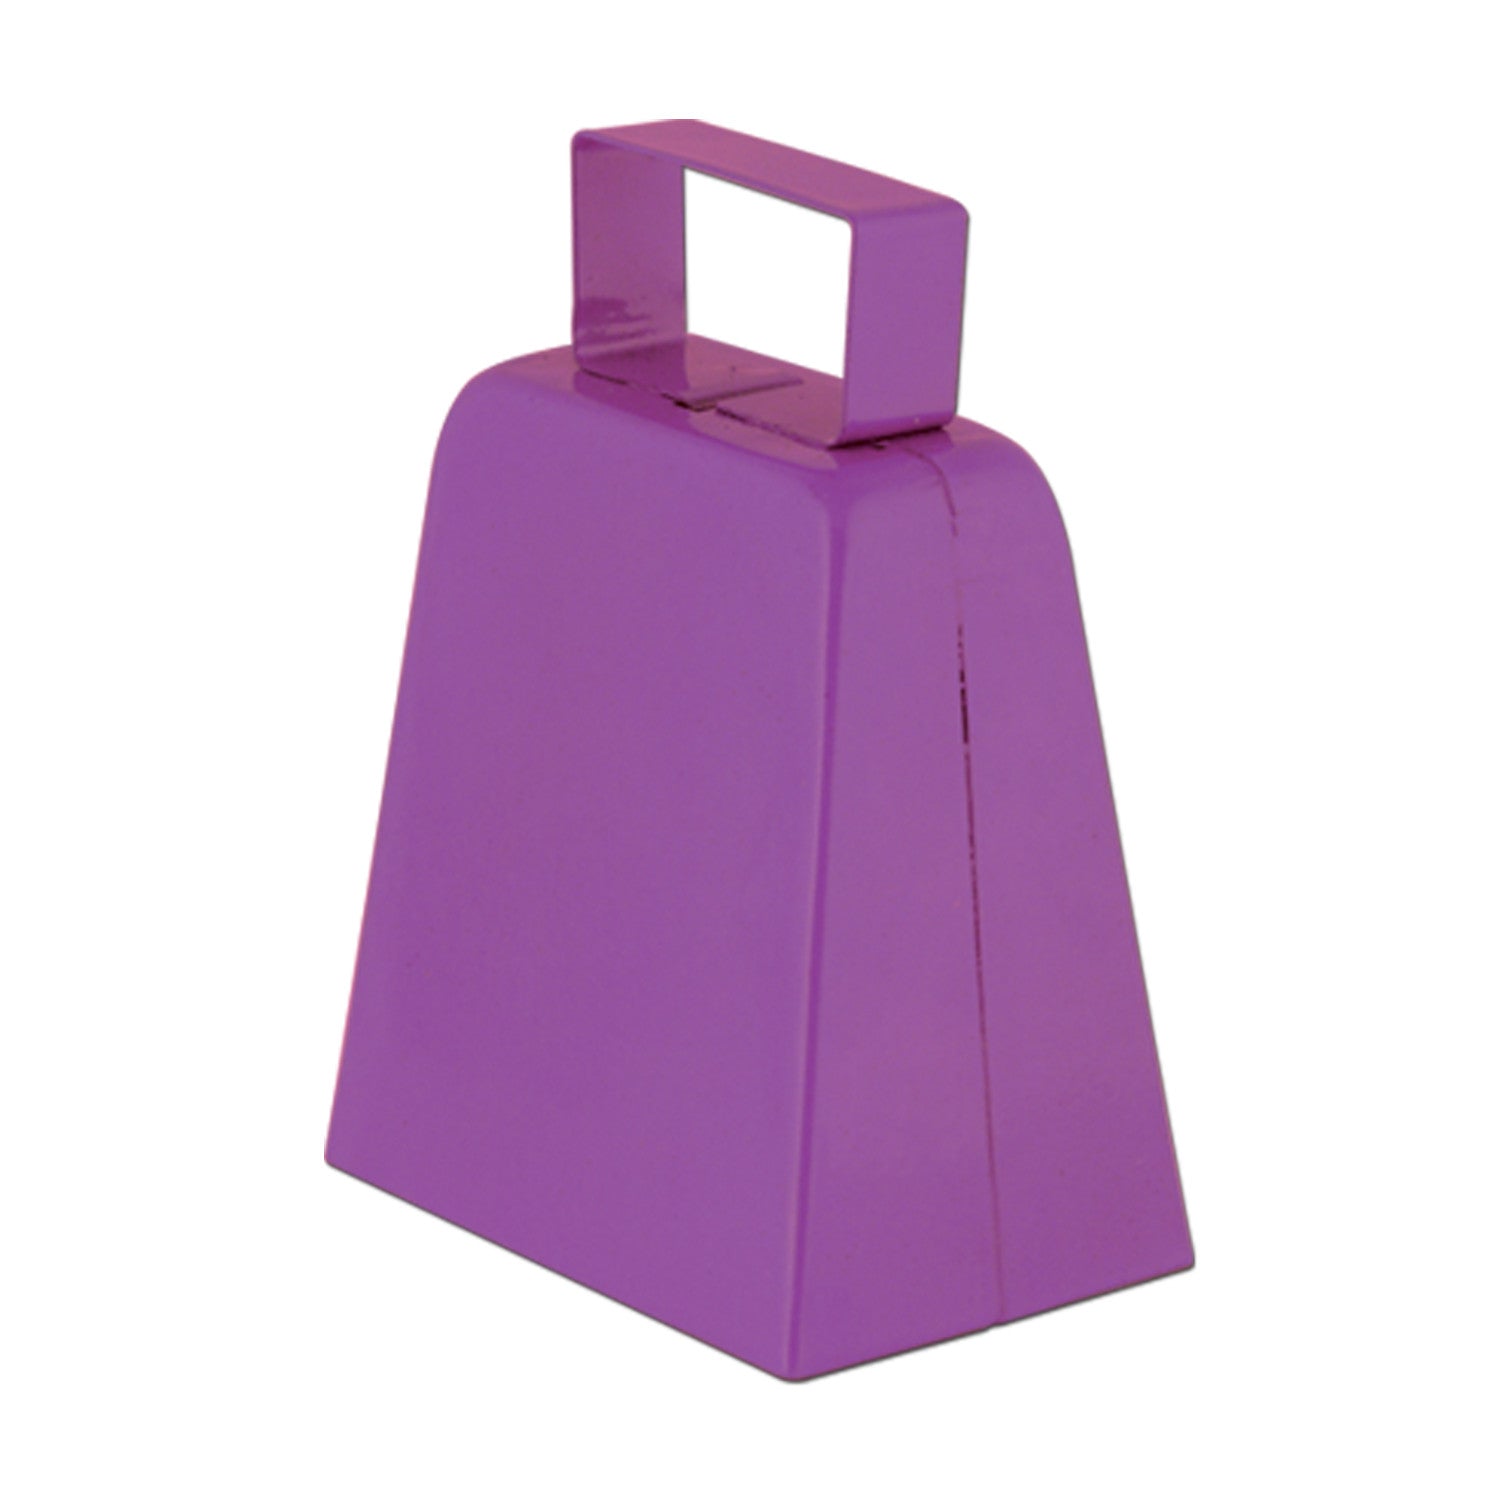 Medium sized purple cowbell with welded handle for sporting events